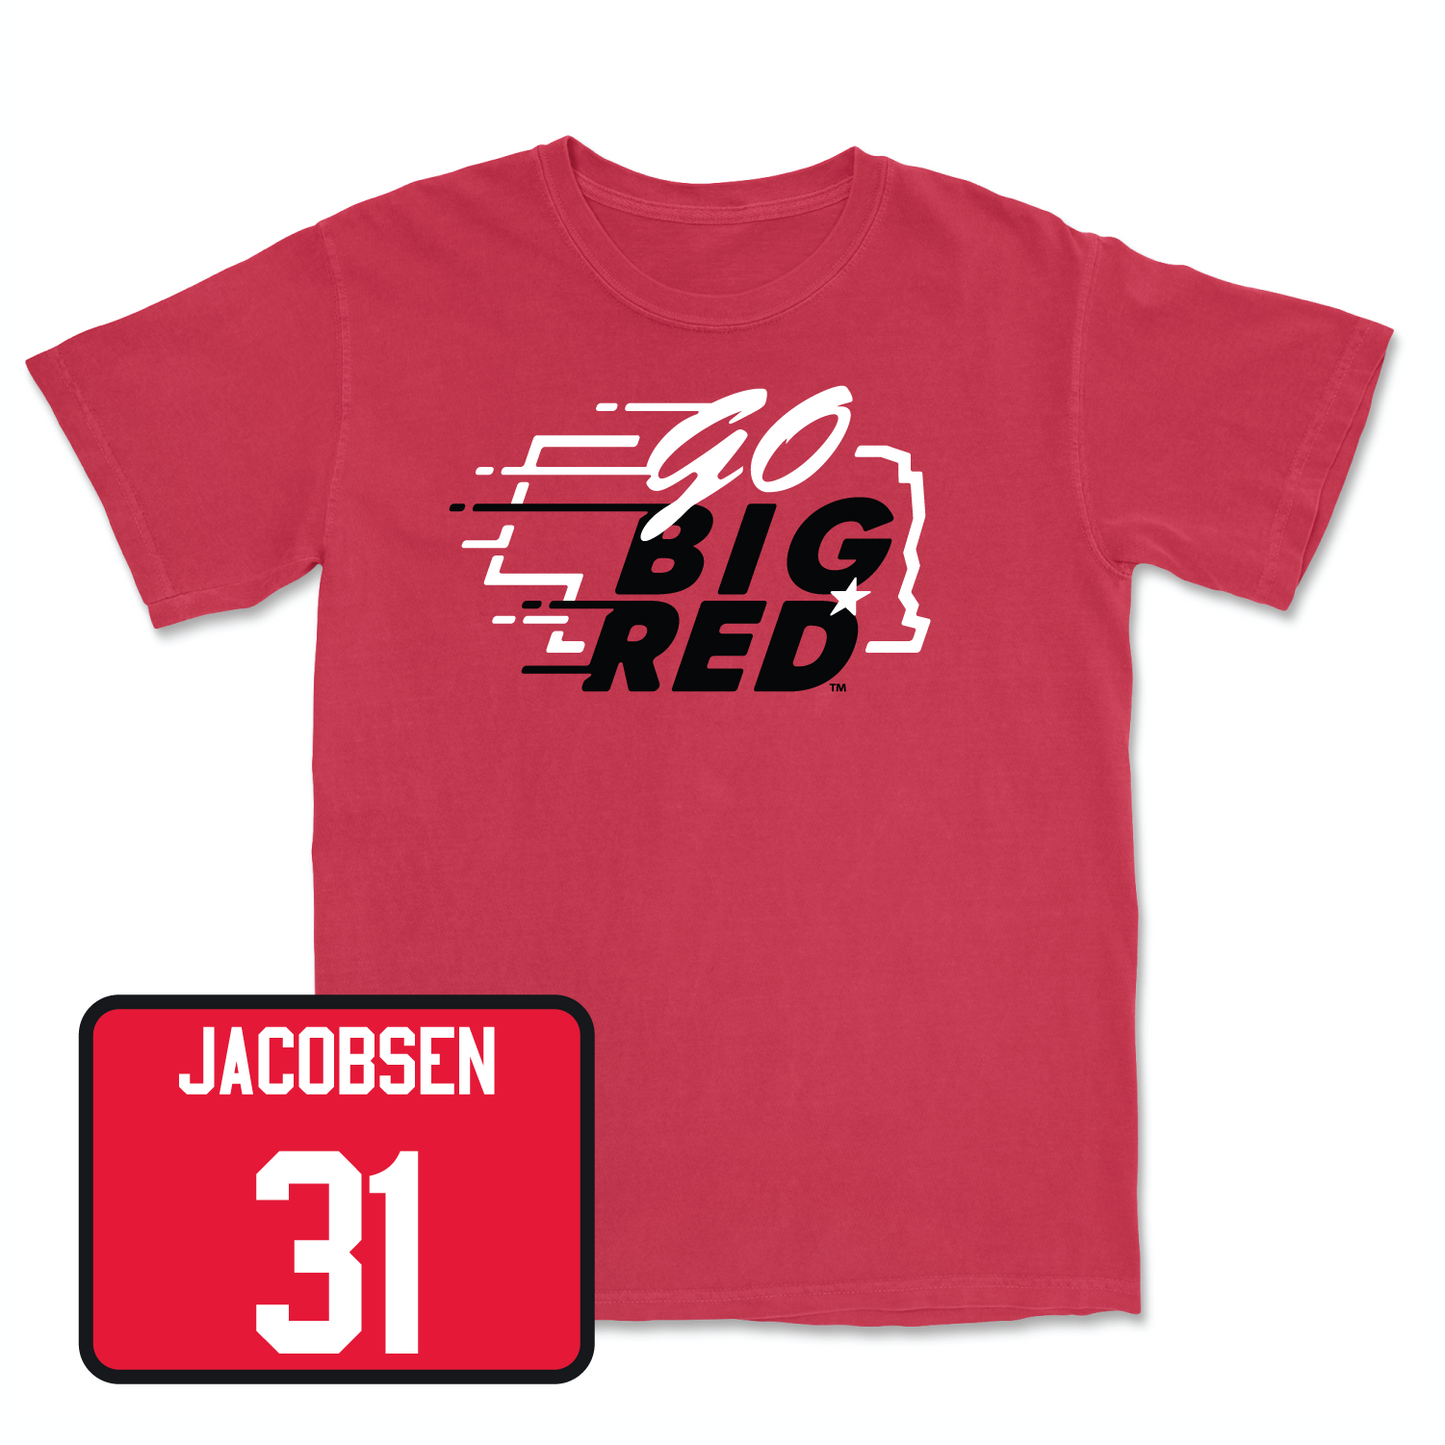 Red Men's Basketball GBR Tee Large / Cale Jacobsen | #31